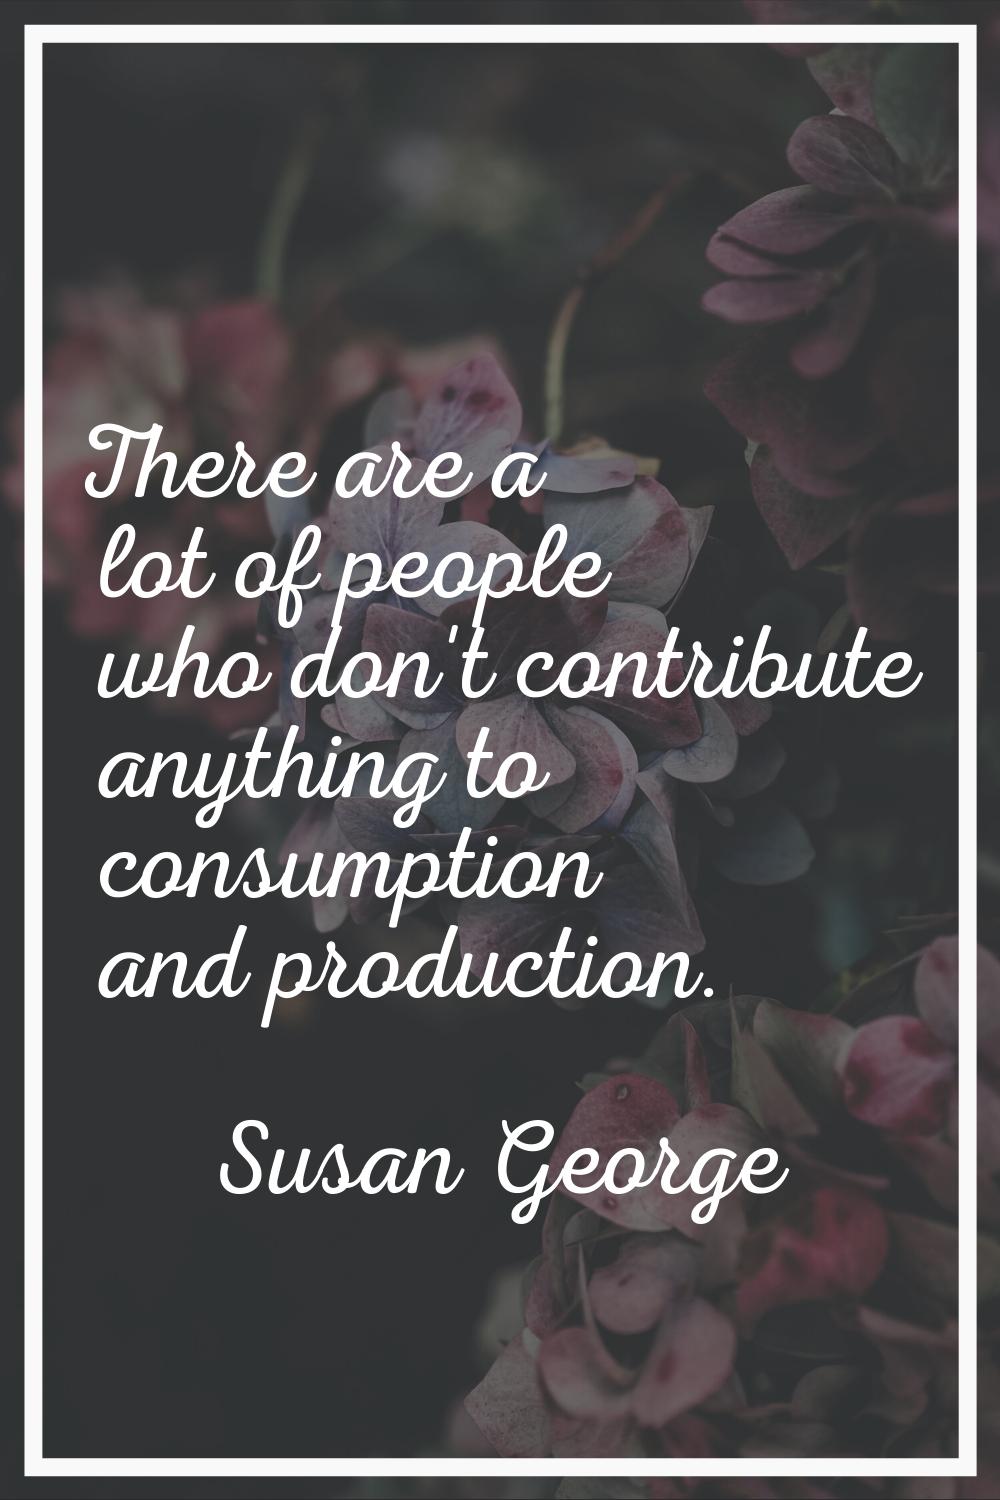 There are a lot of people who don't contribute anything to consumption and production.